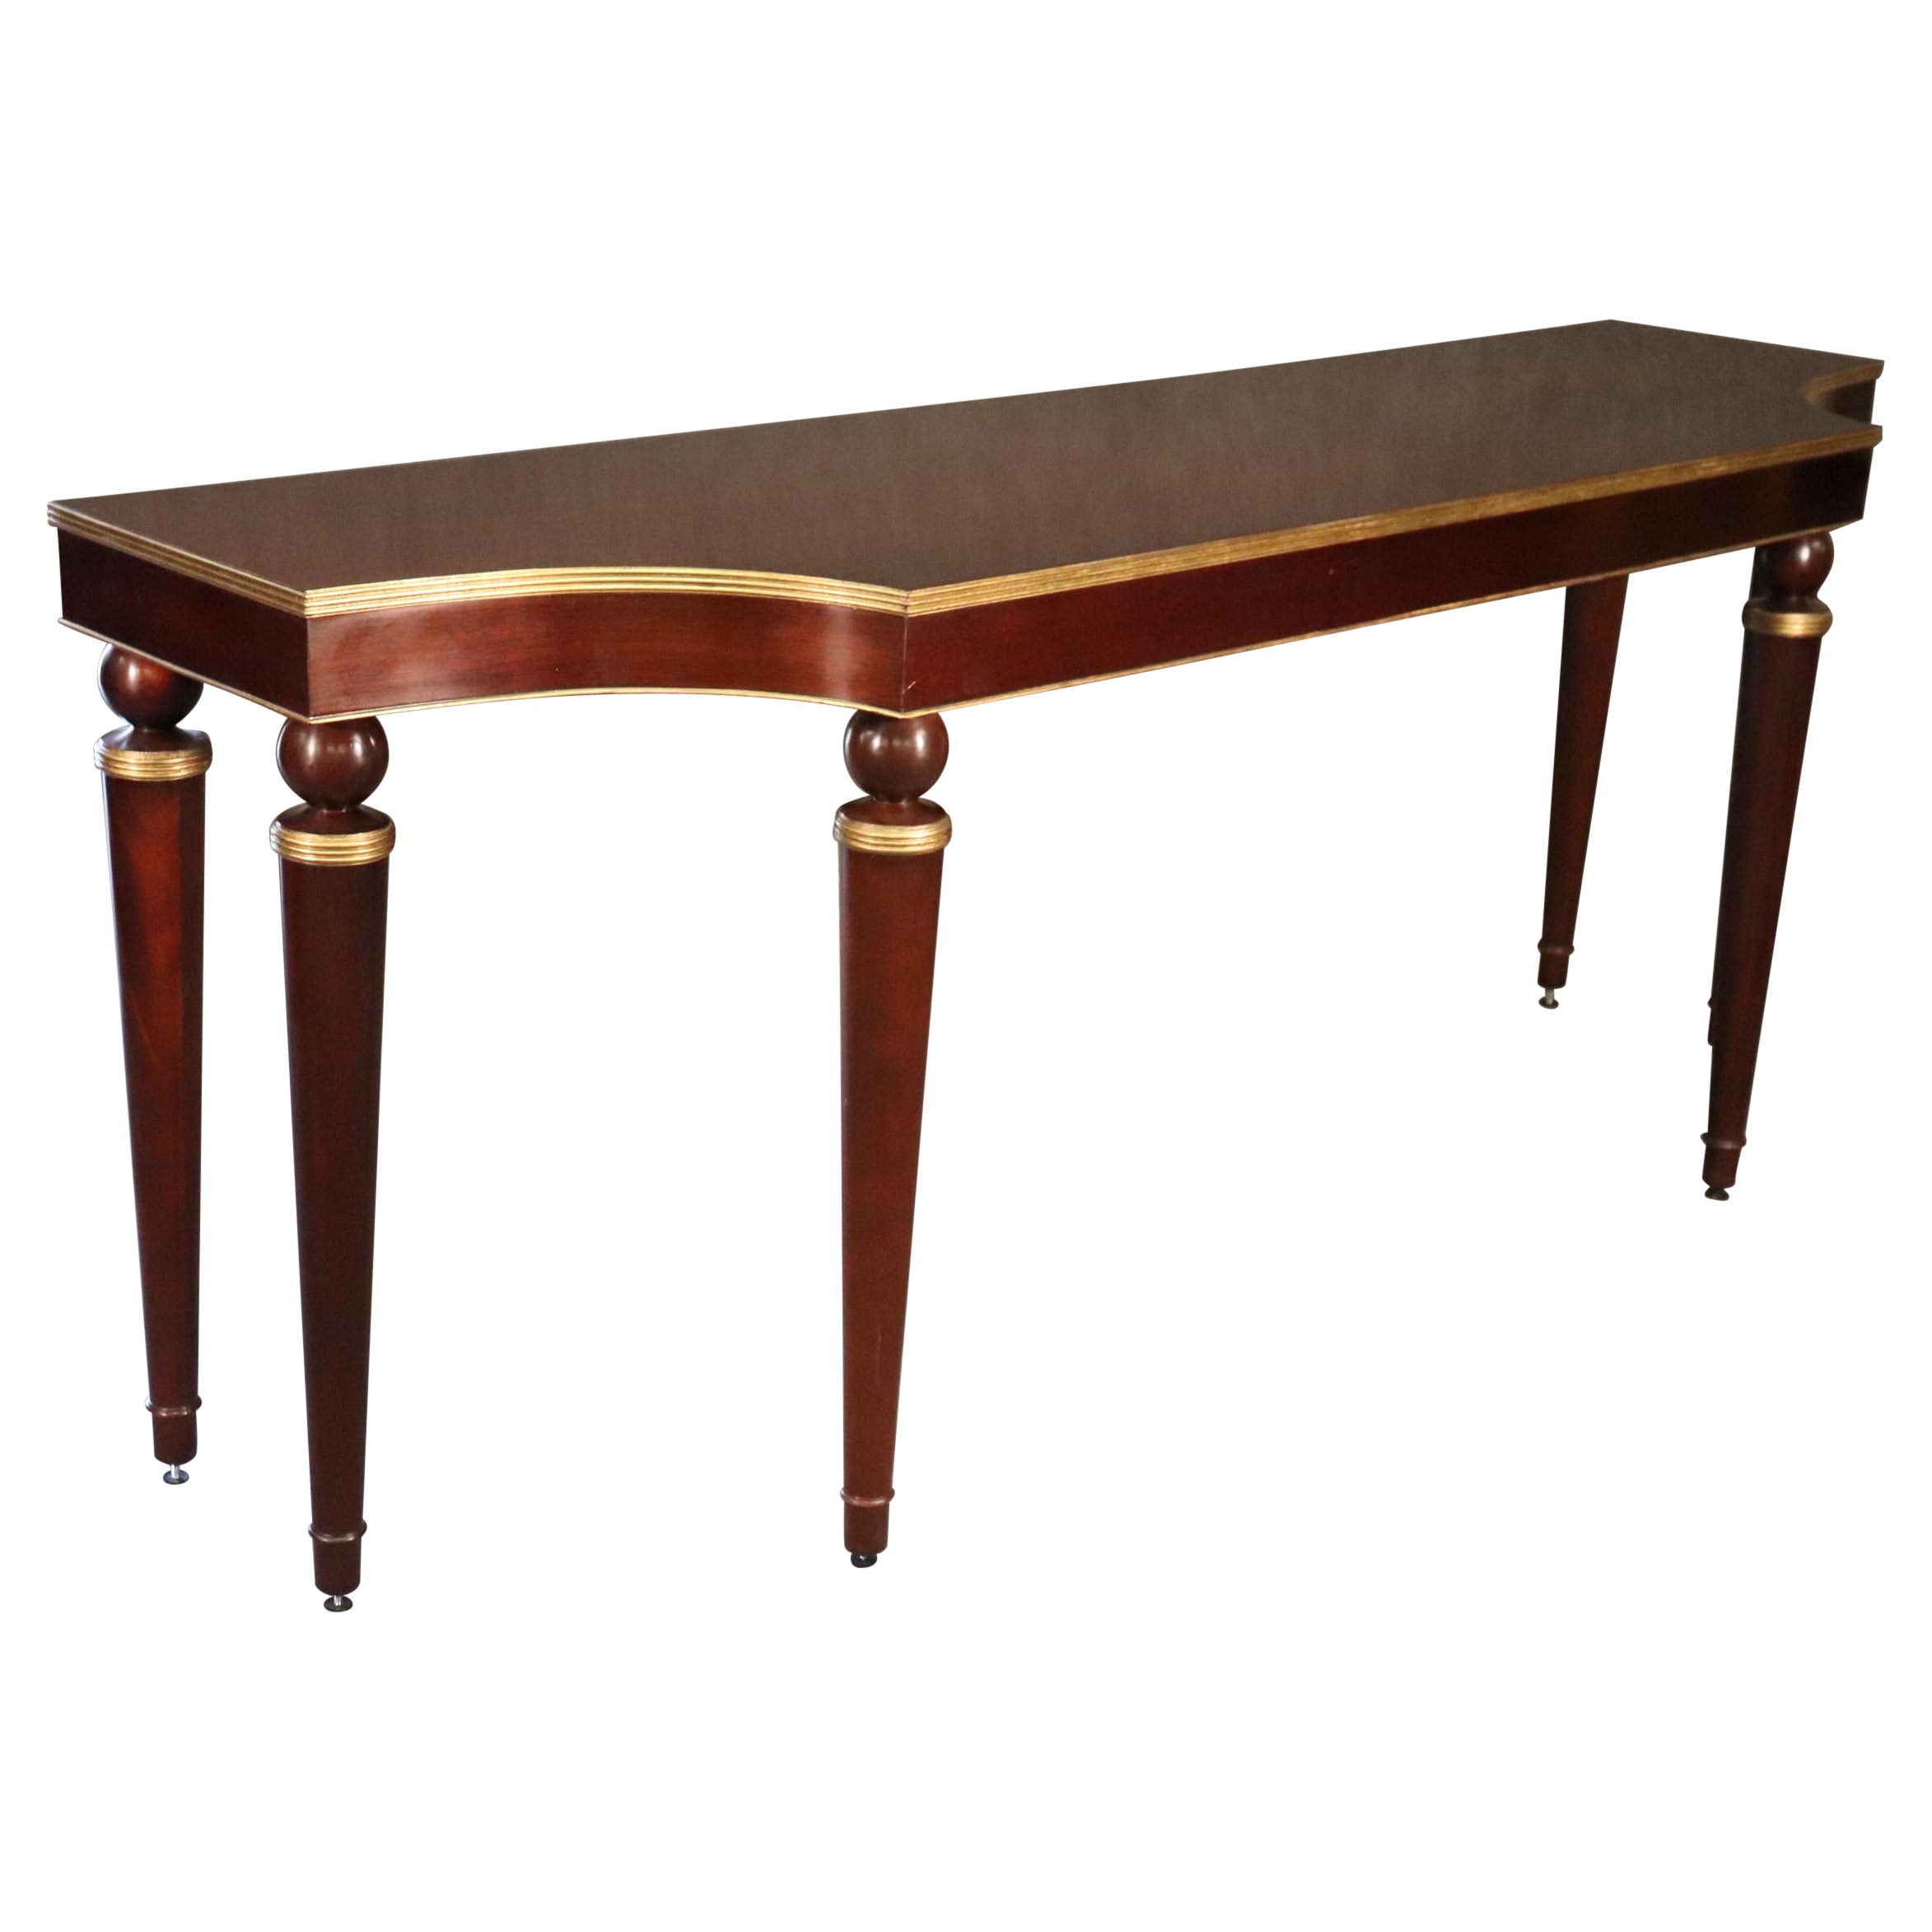 Barbara Barry for Baker Art Deco Style Solid Mahogany Gilded Console Sofa Table